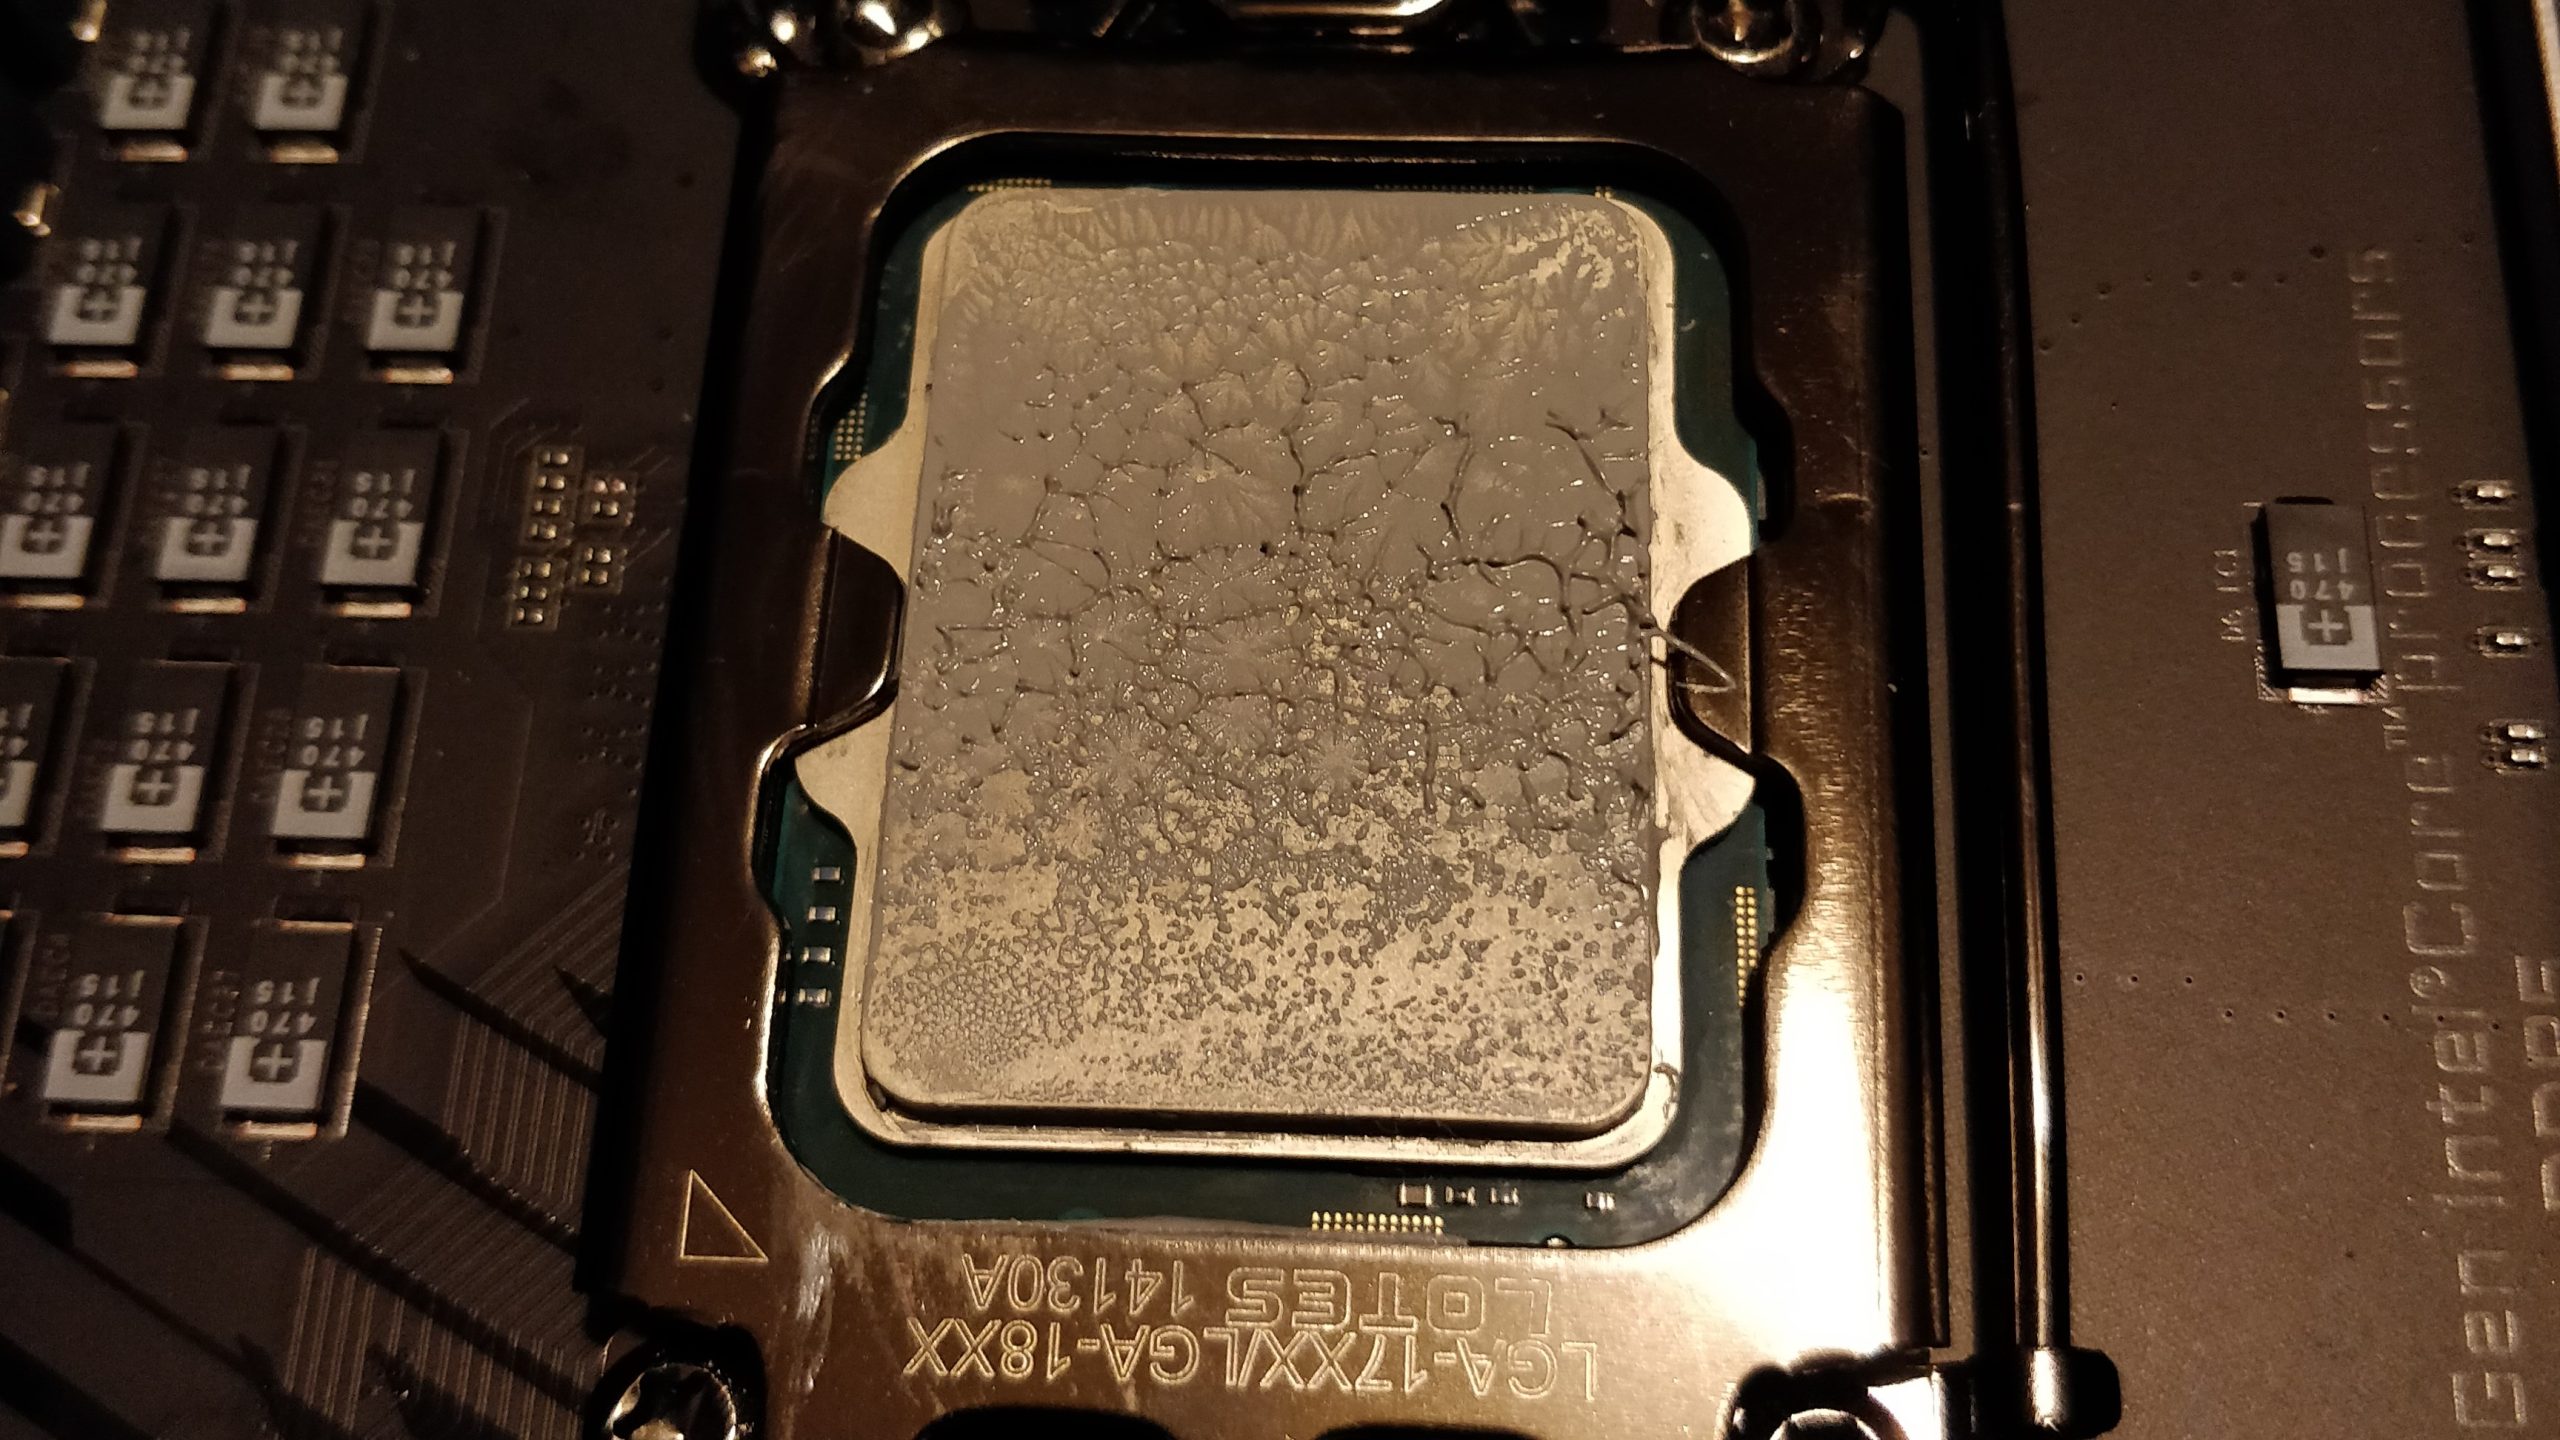 Alder Lake's cooling problem straightened out by 5 degrees! - Simple ILM-Mod for Intel's LGA-1700 socket | Practice